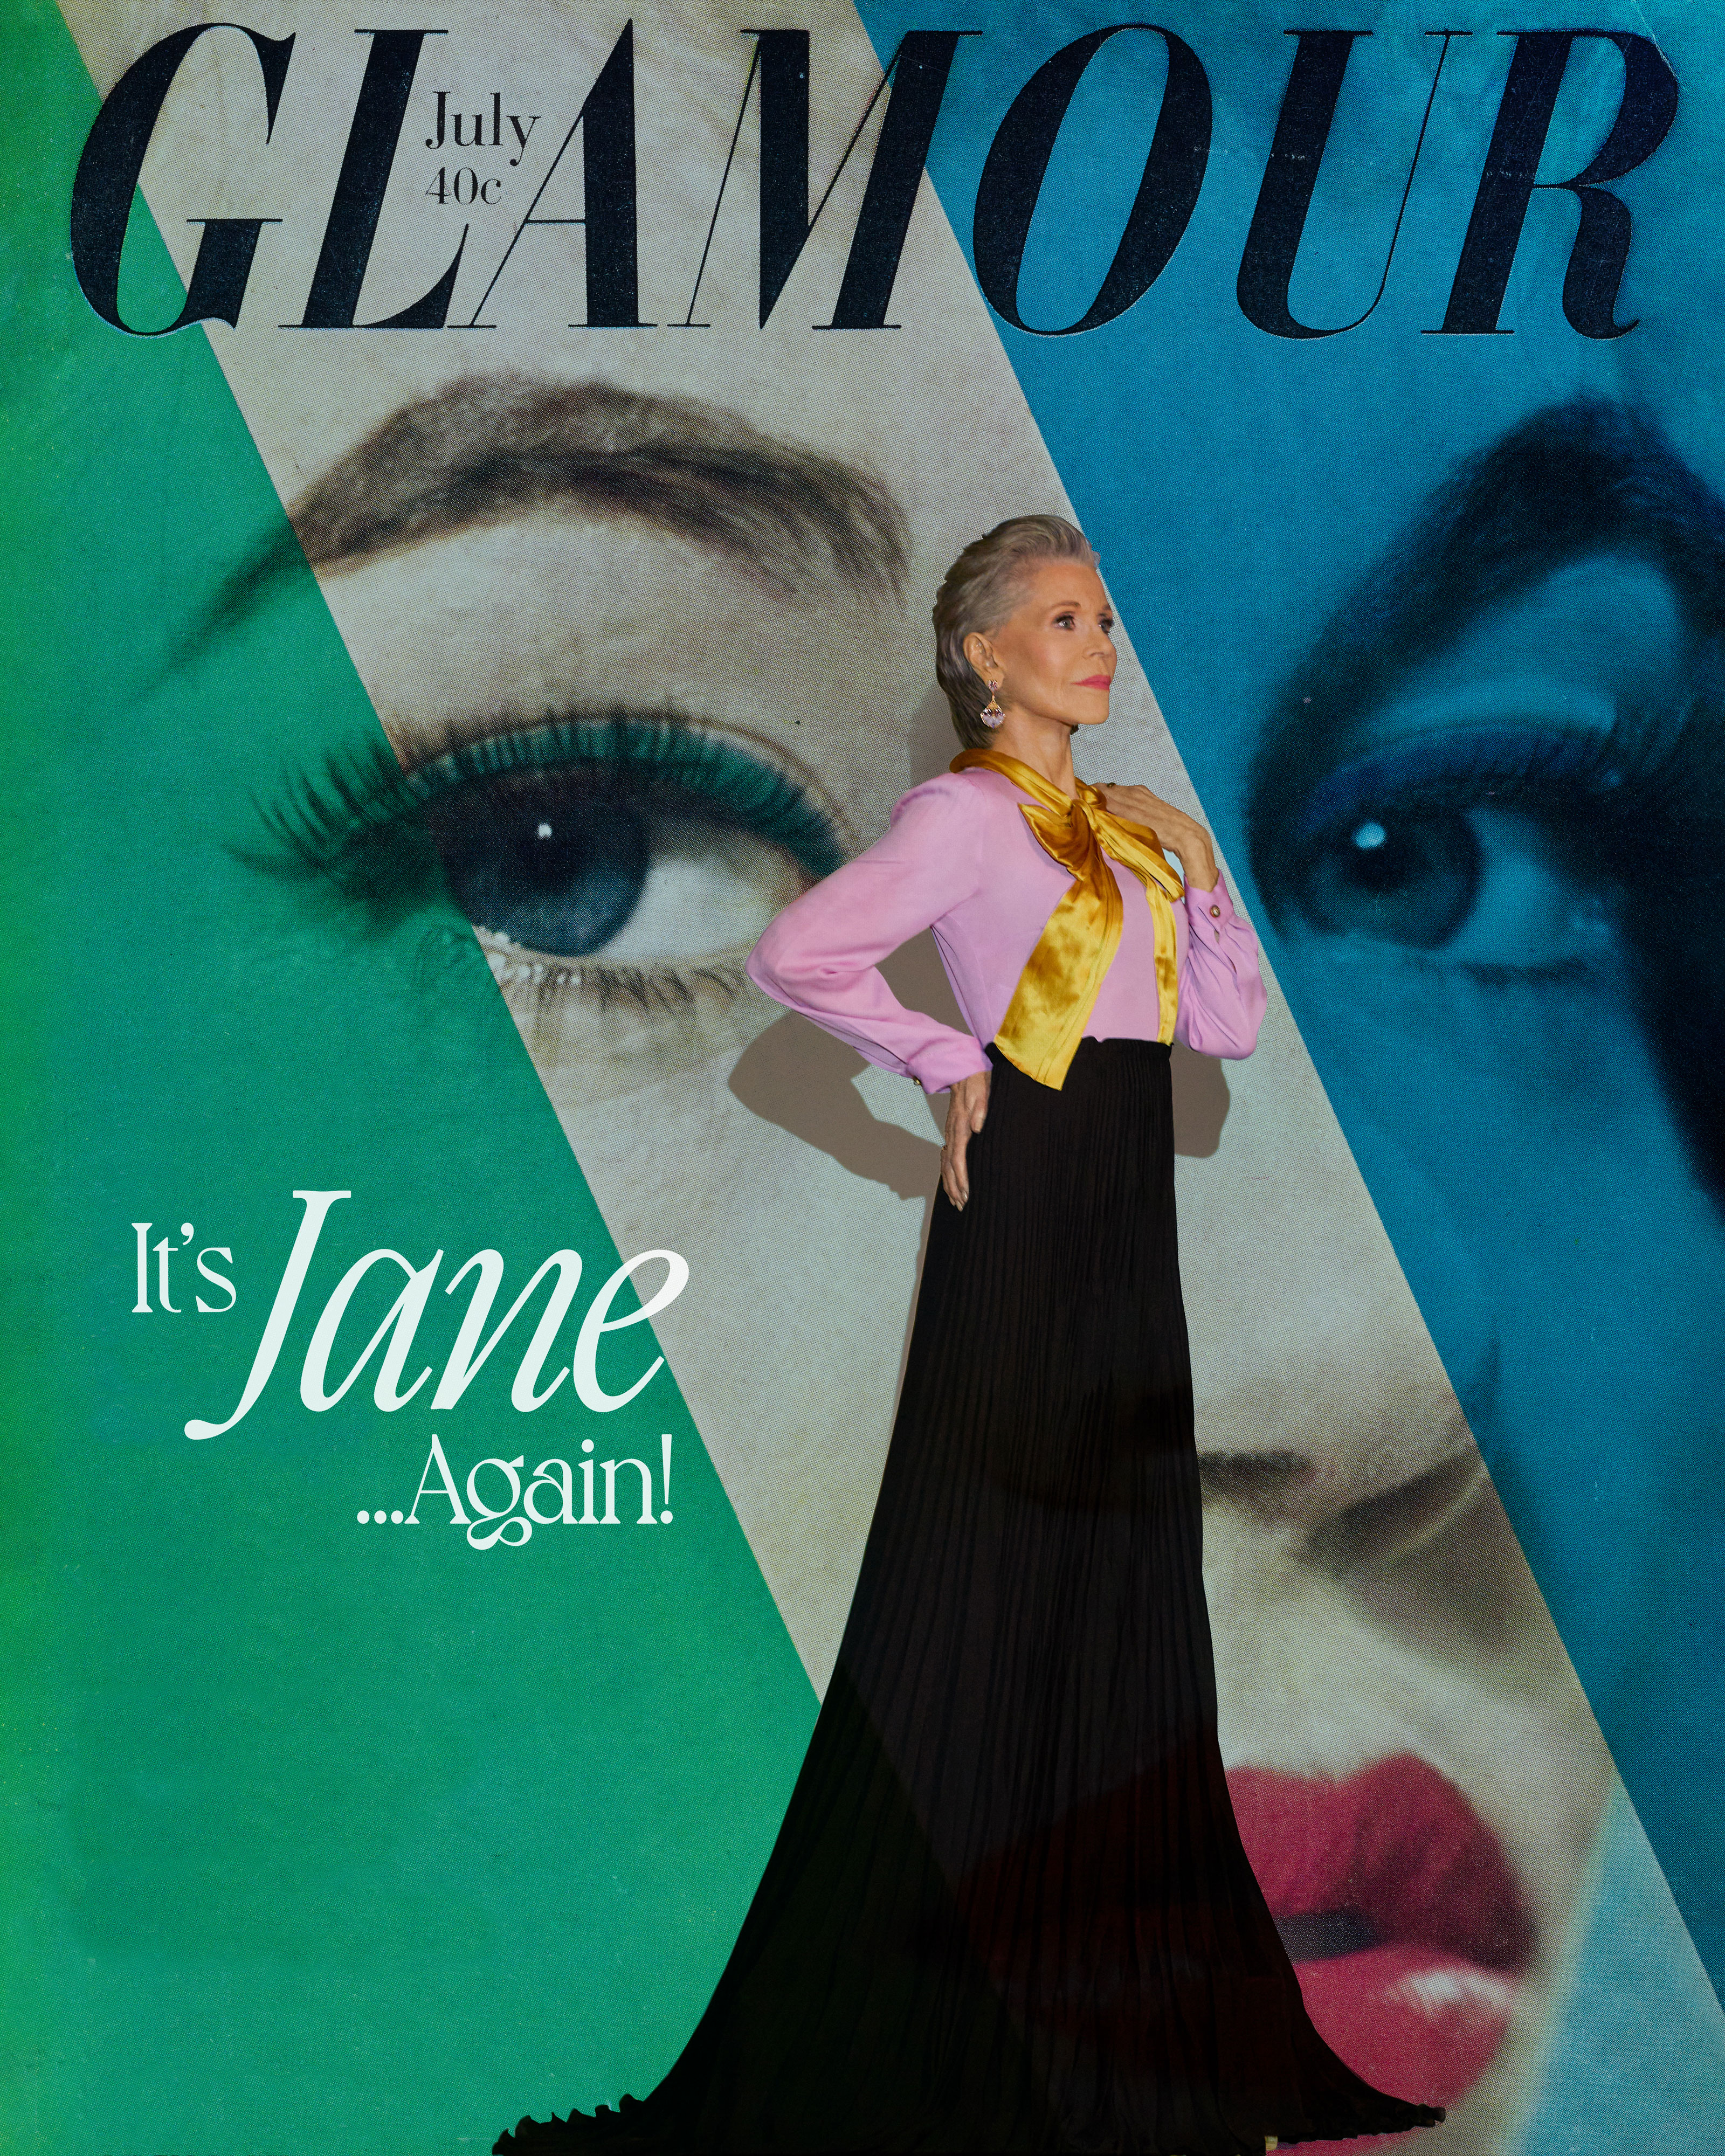 Glamour - “It’s Jane . . . Again!” July 2022